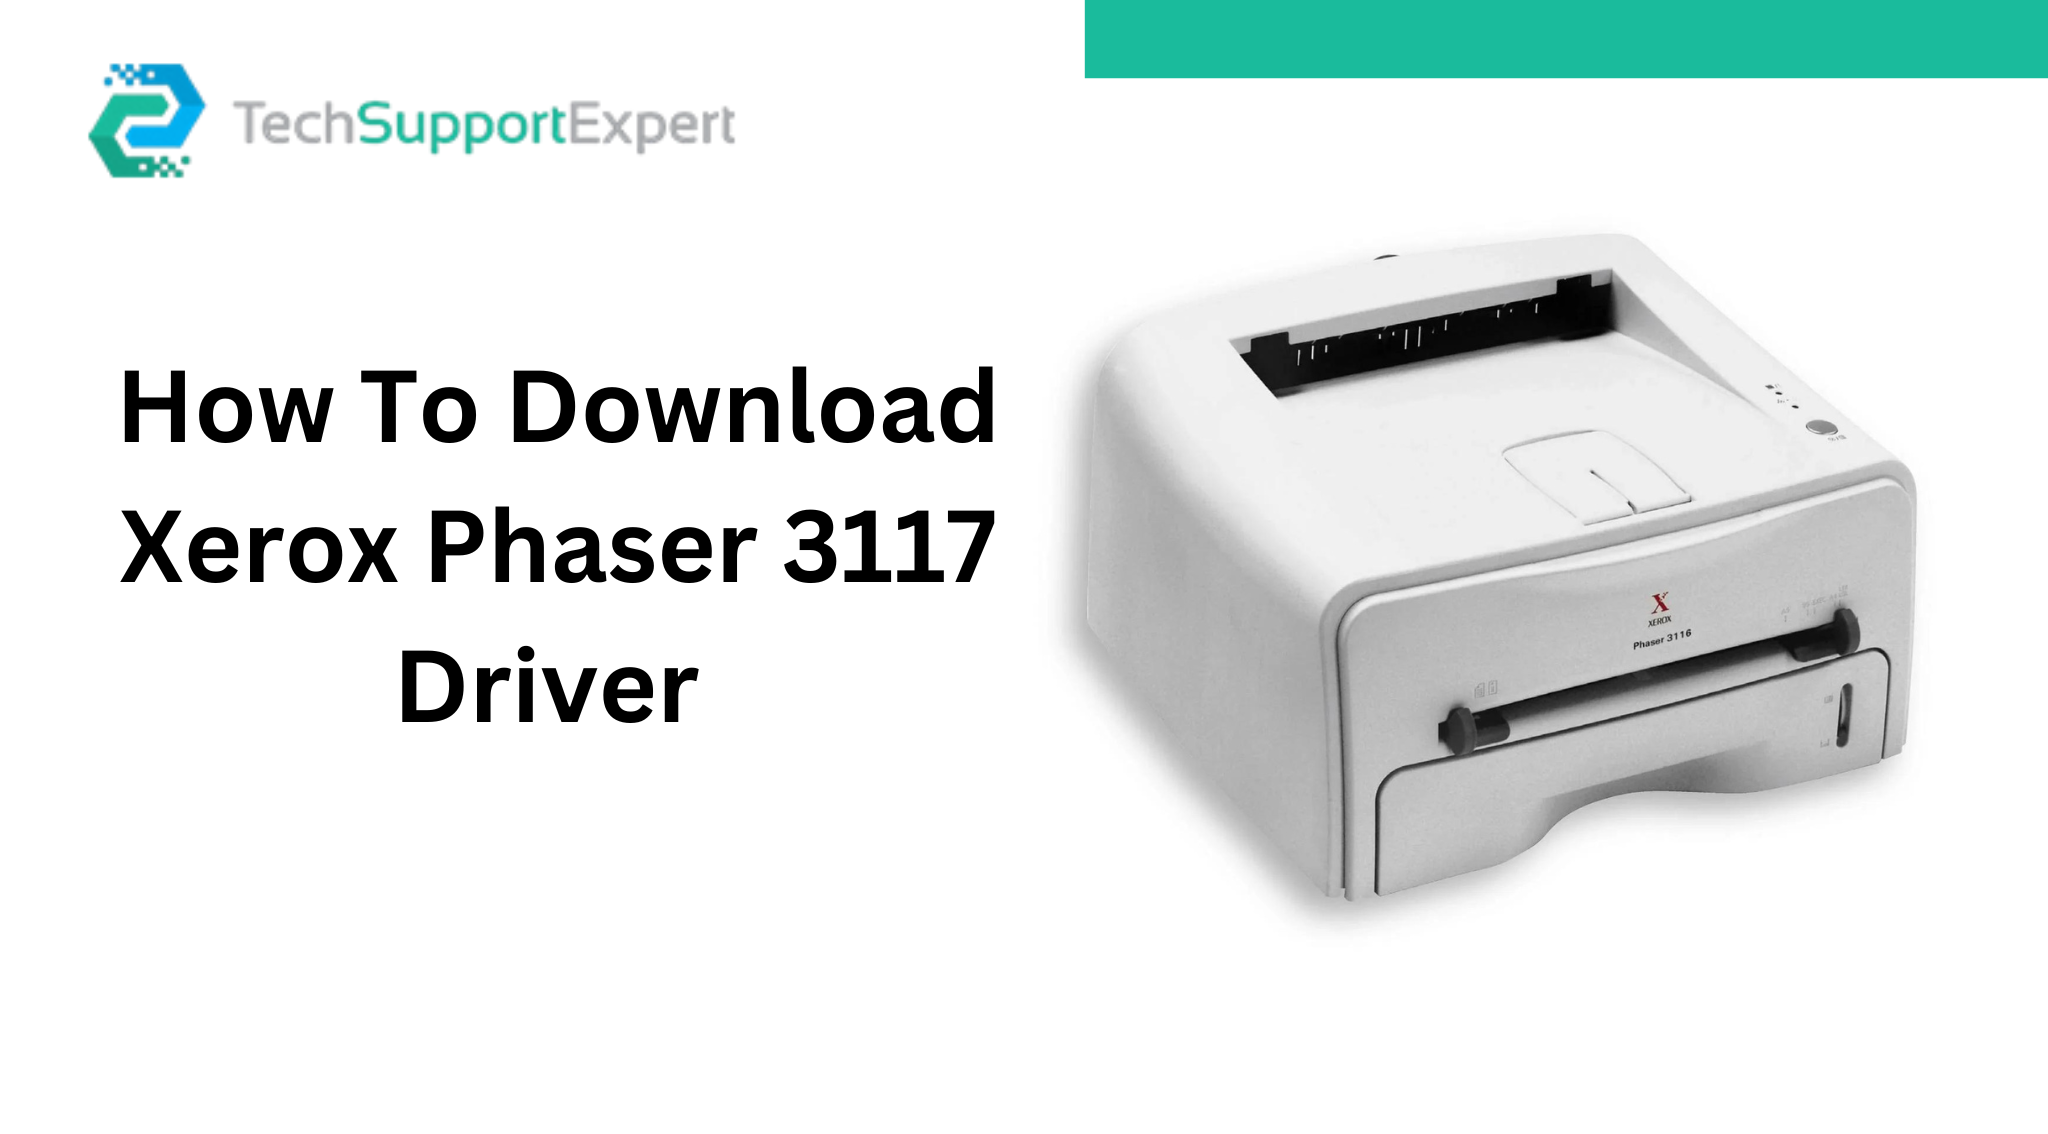 how to download Xerox Phaser 3117 Driver